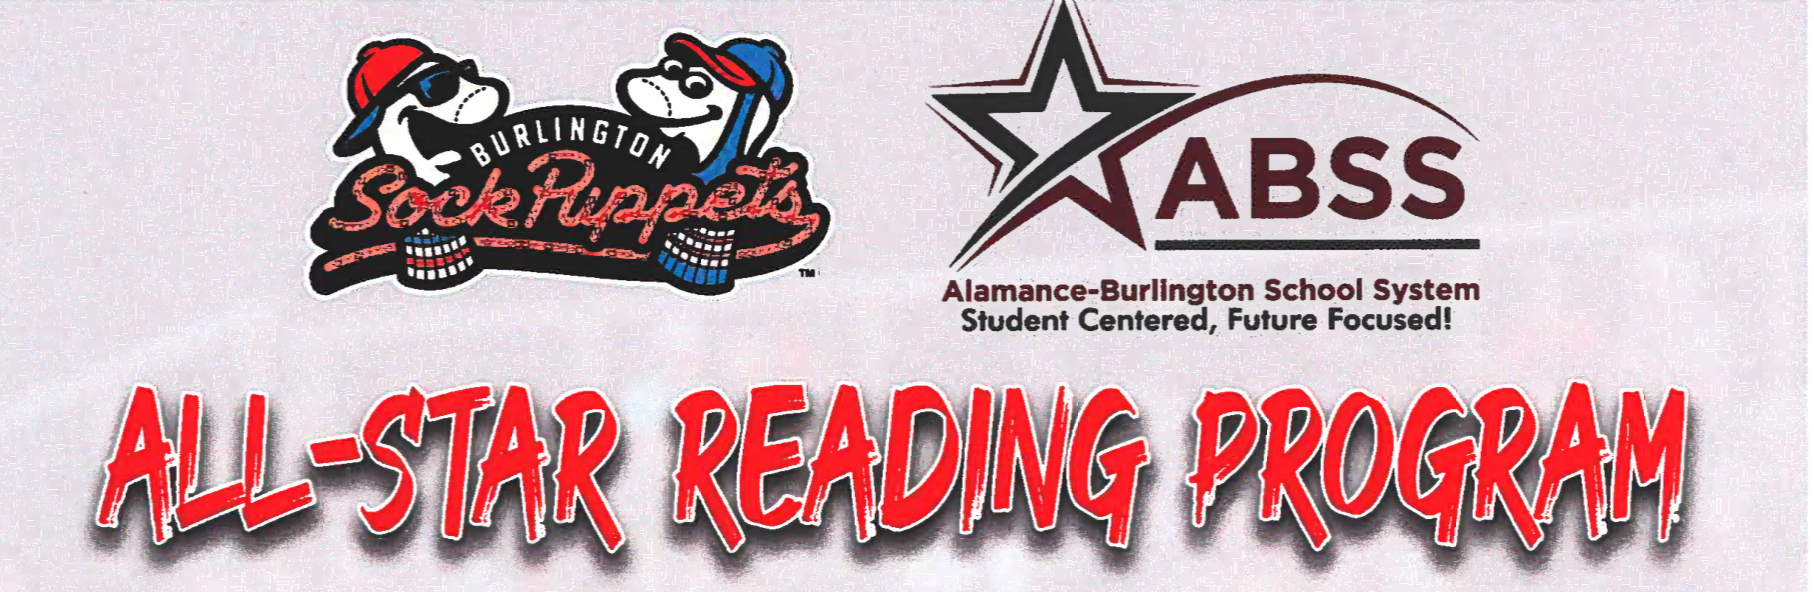 Sock Puppets baseball team and ABSS logo with text All-Star Reading Program